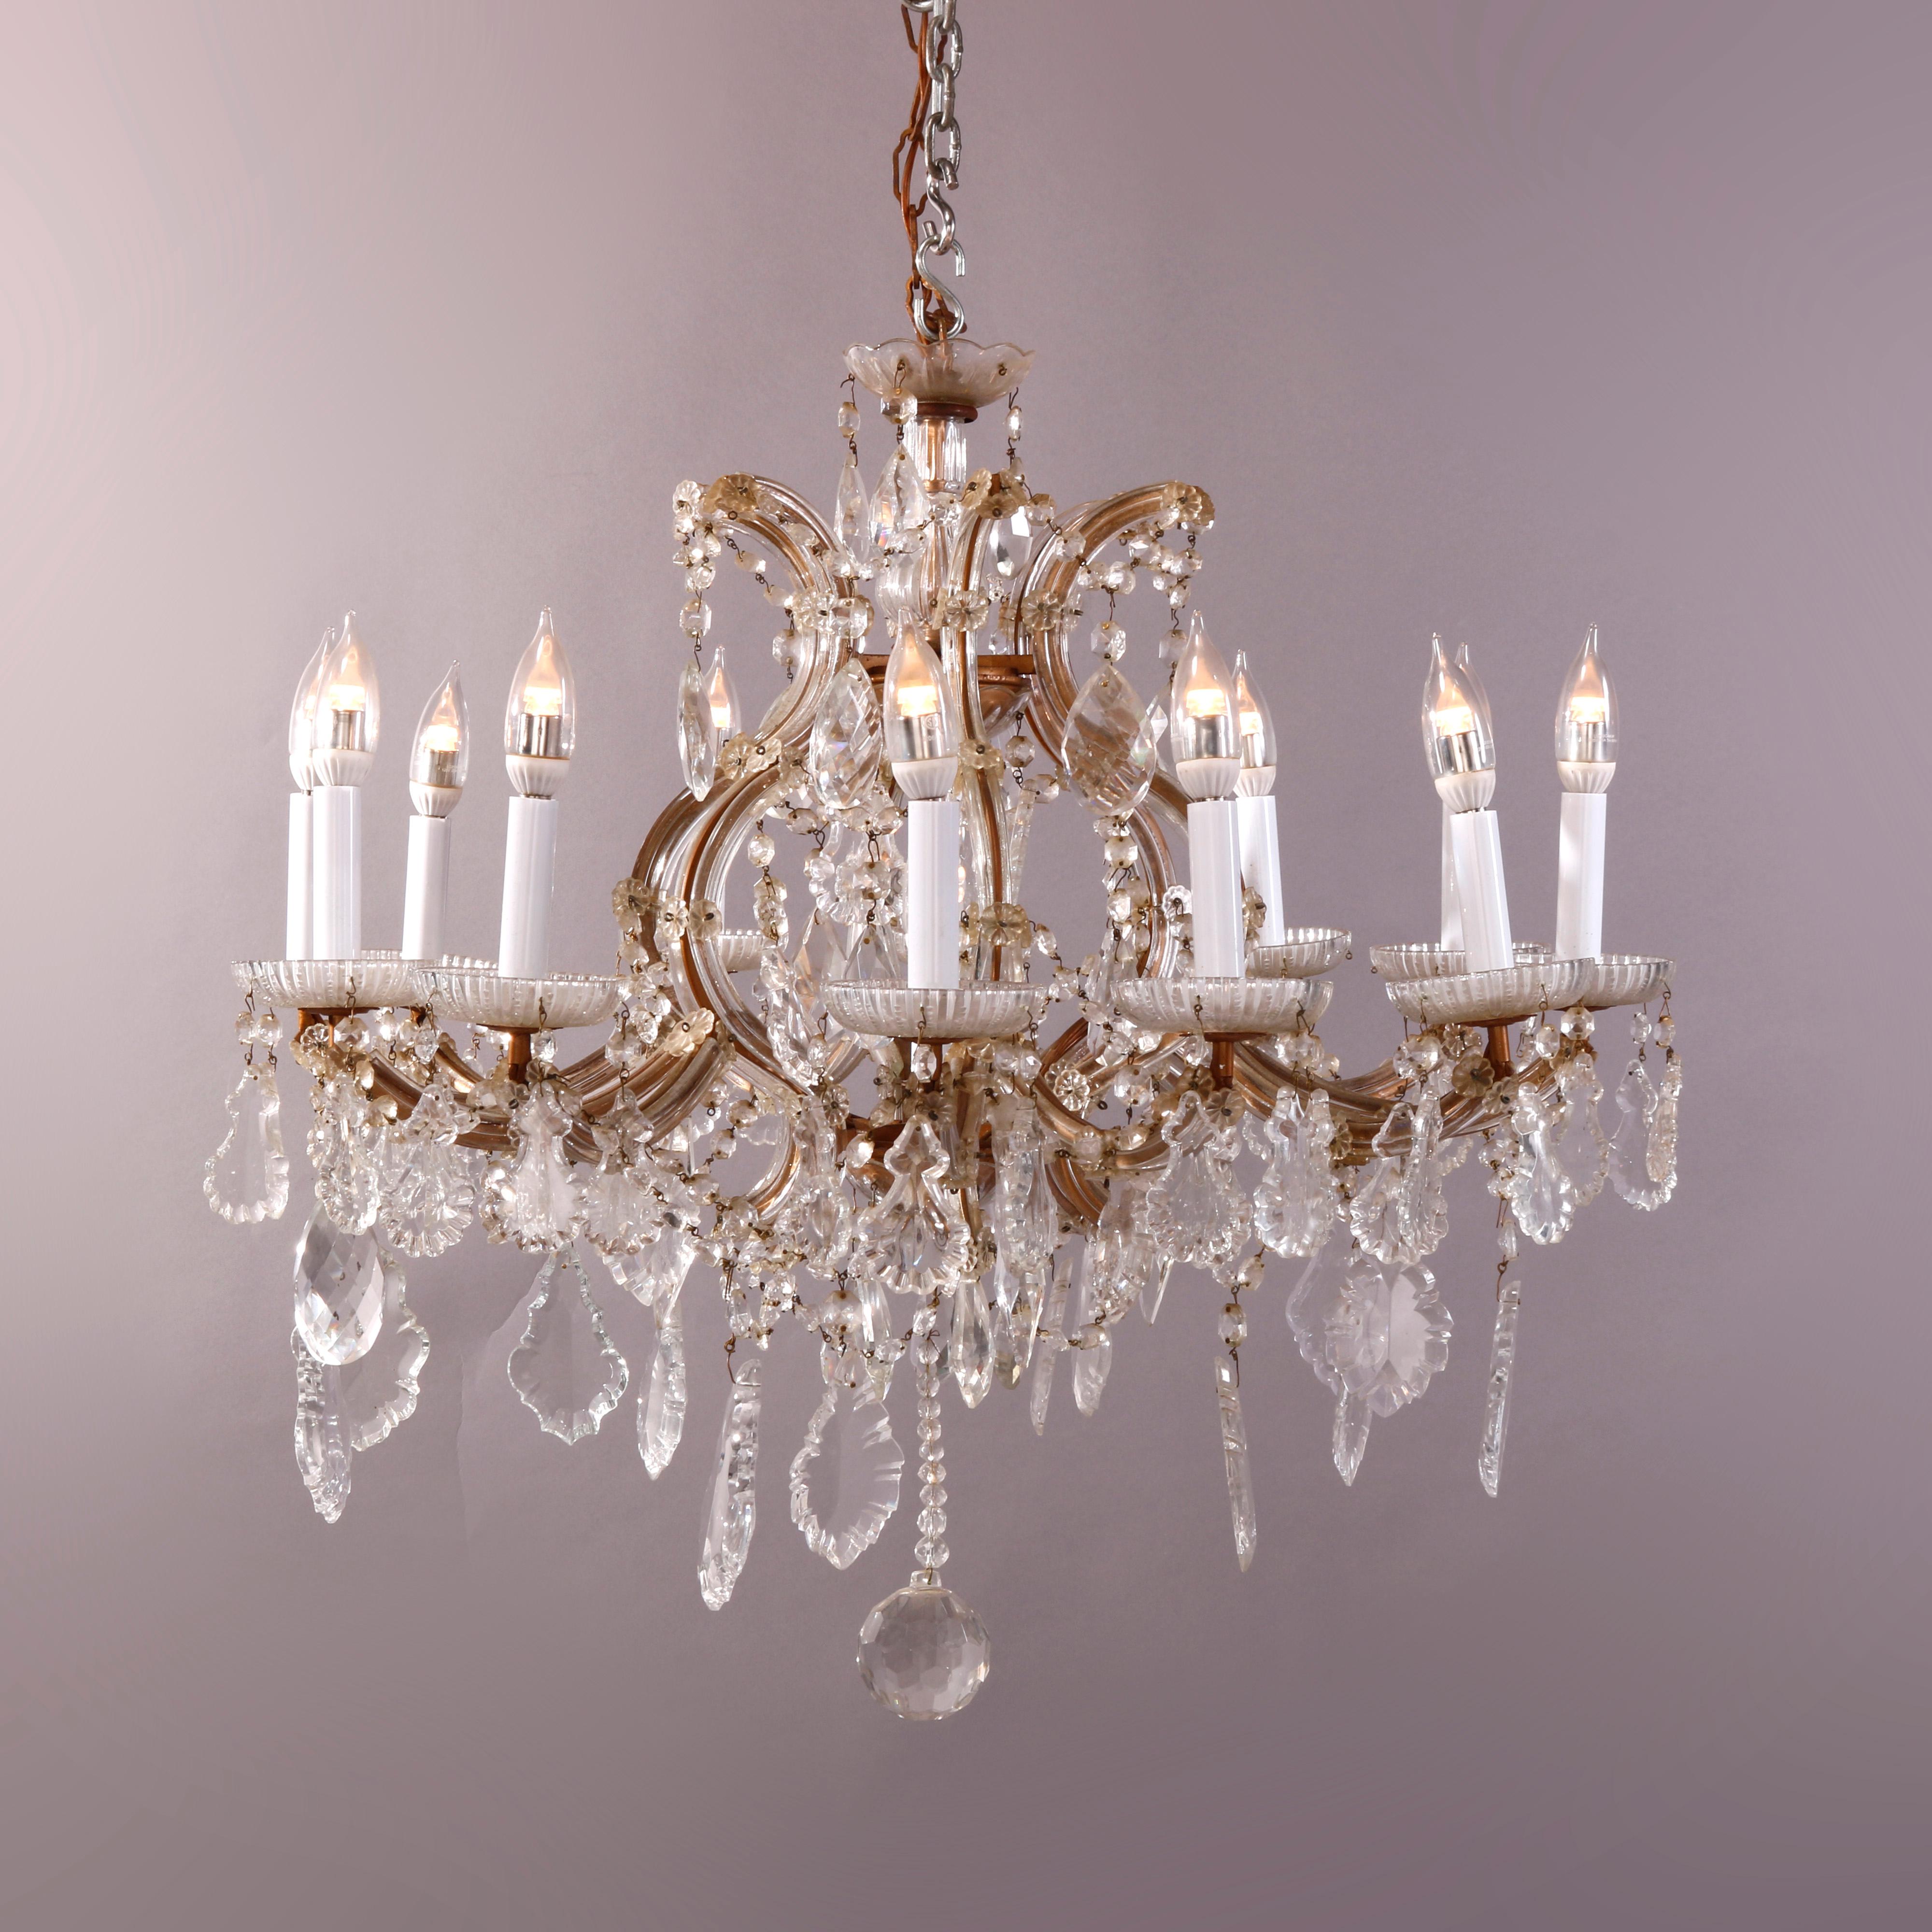 An oversized antique Italian style crystal chandelier offers brass frame with twelve scroll form arms terminating in candle lights surrounding central light and having drop and strung cut crystals throughout, c1930

Measures - fixture 27.5'' H X